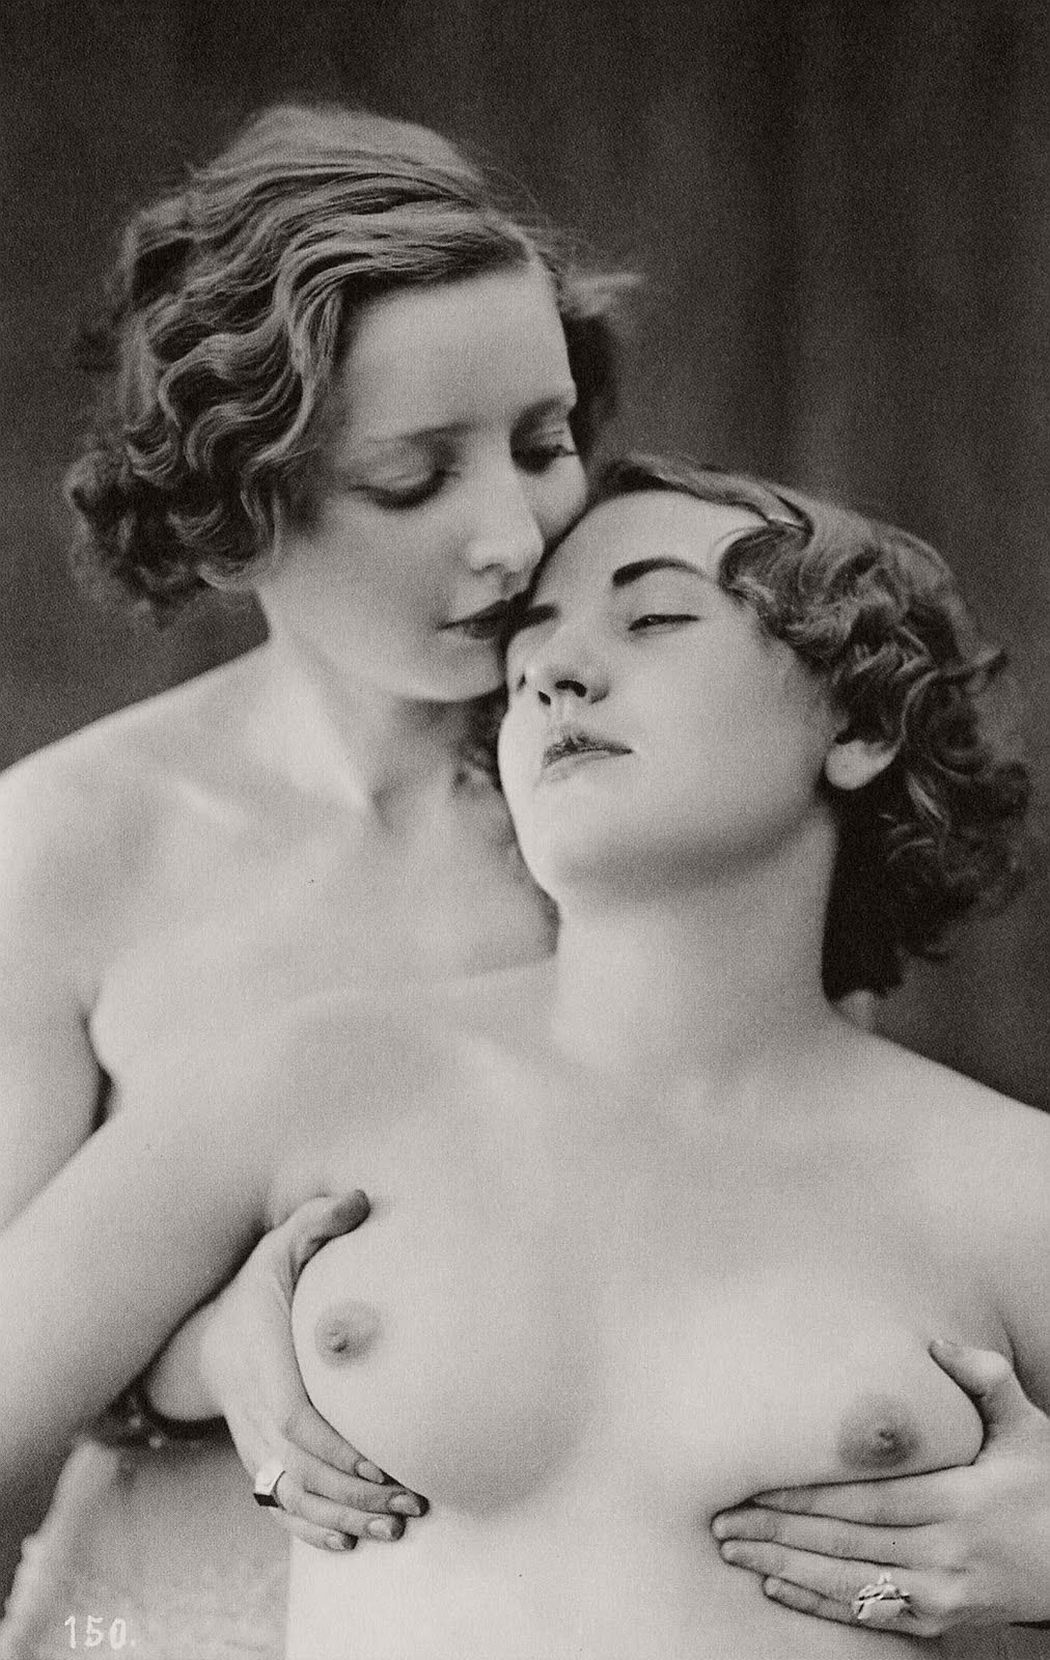 1930s,erotica,featured,french postcard,lesbian,nudes,vintage.